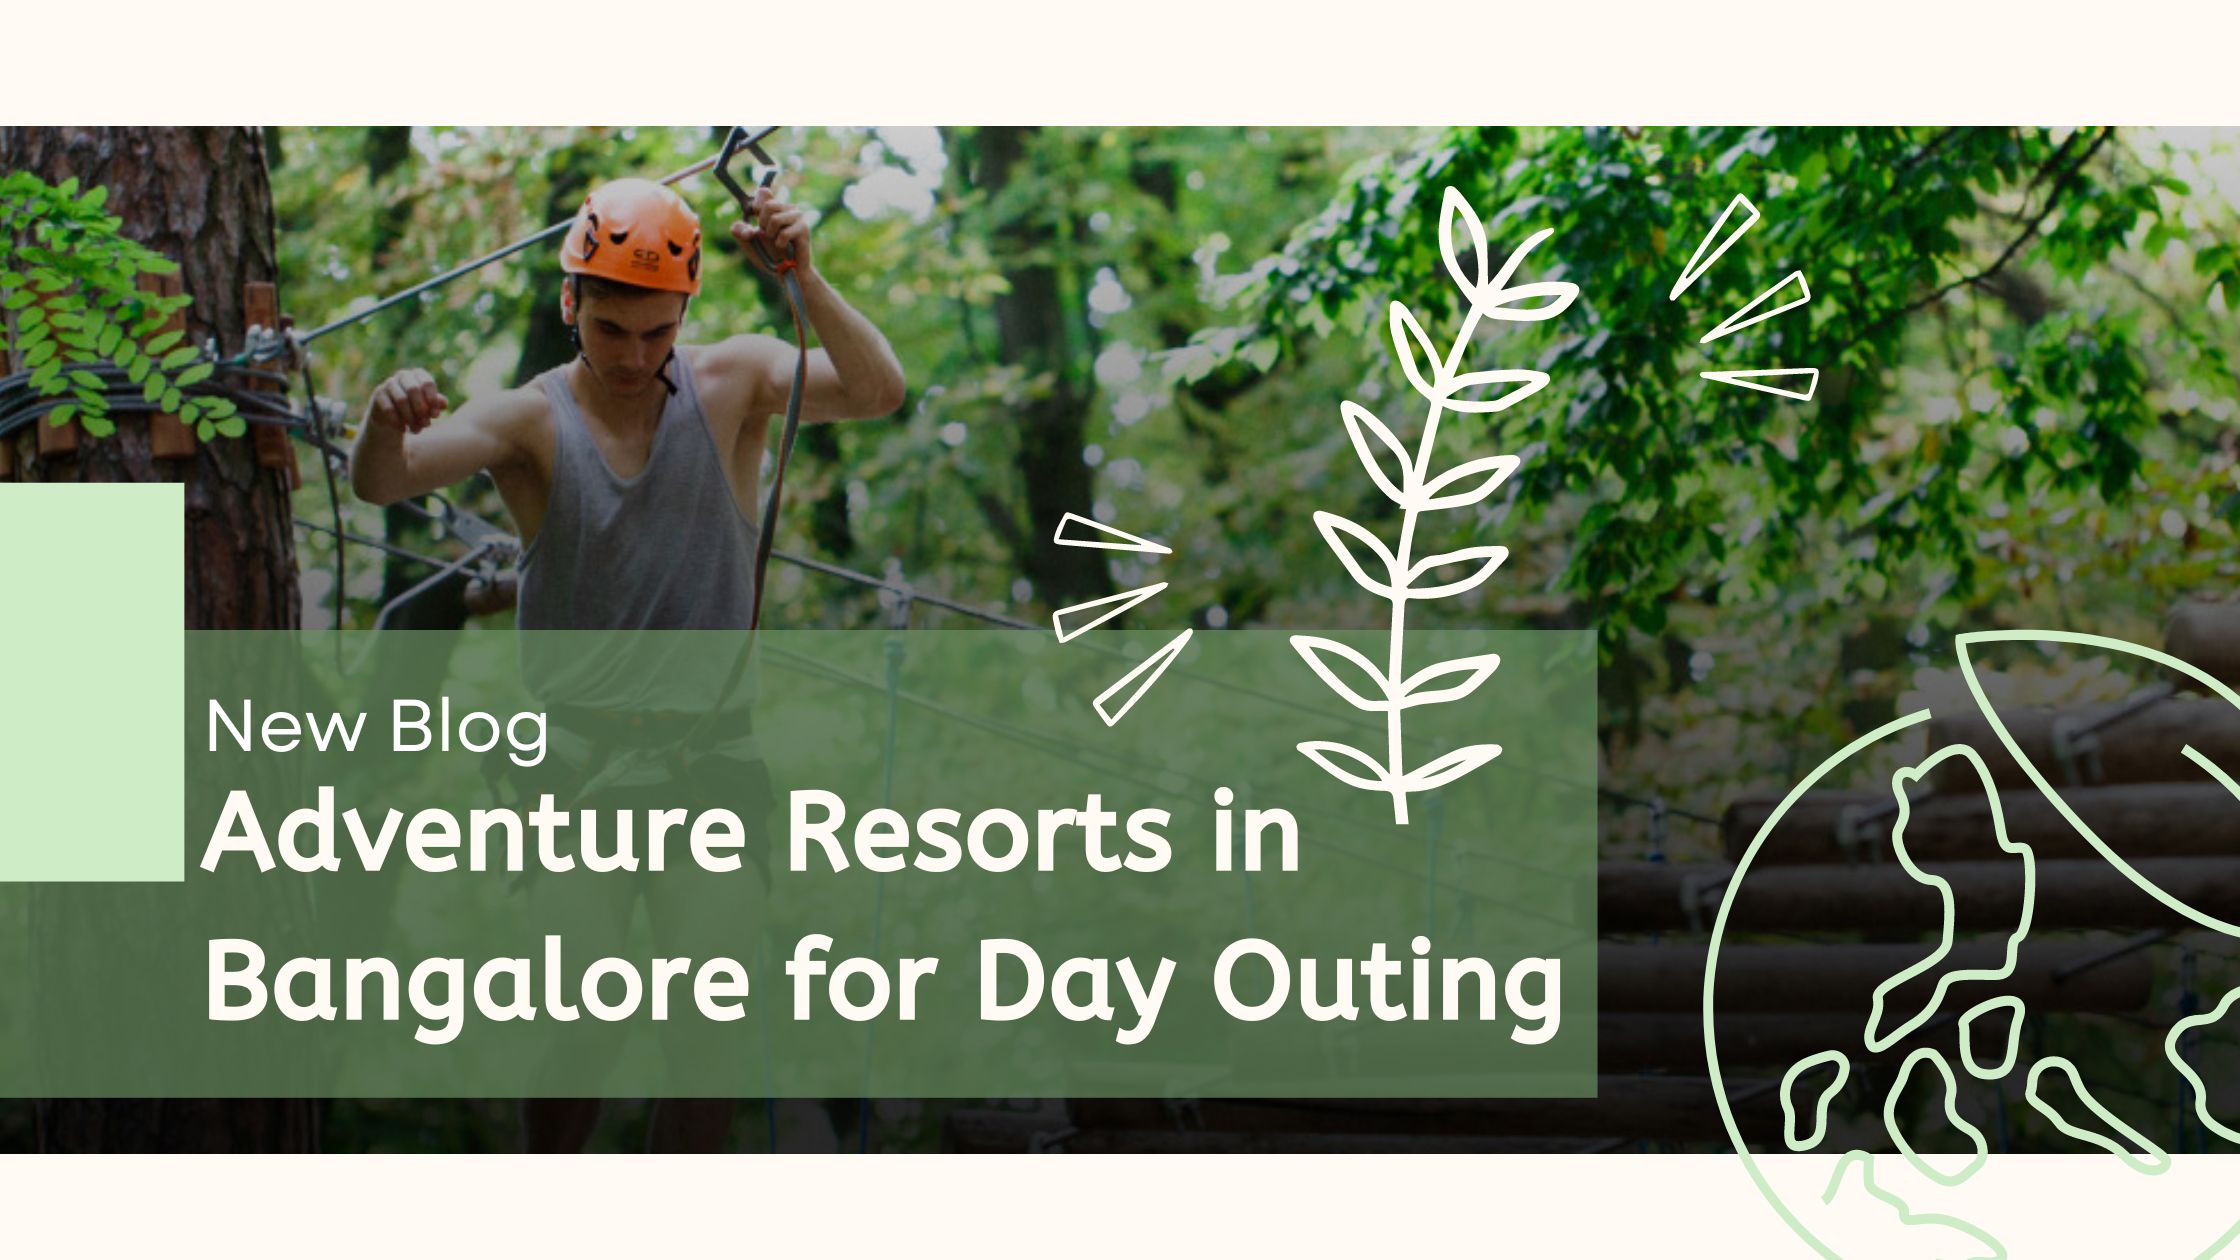 Adventure Resorts in Bangalore for Day Outing